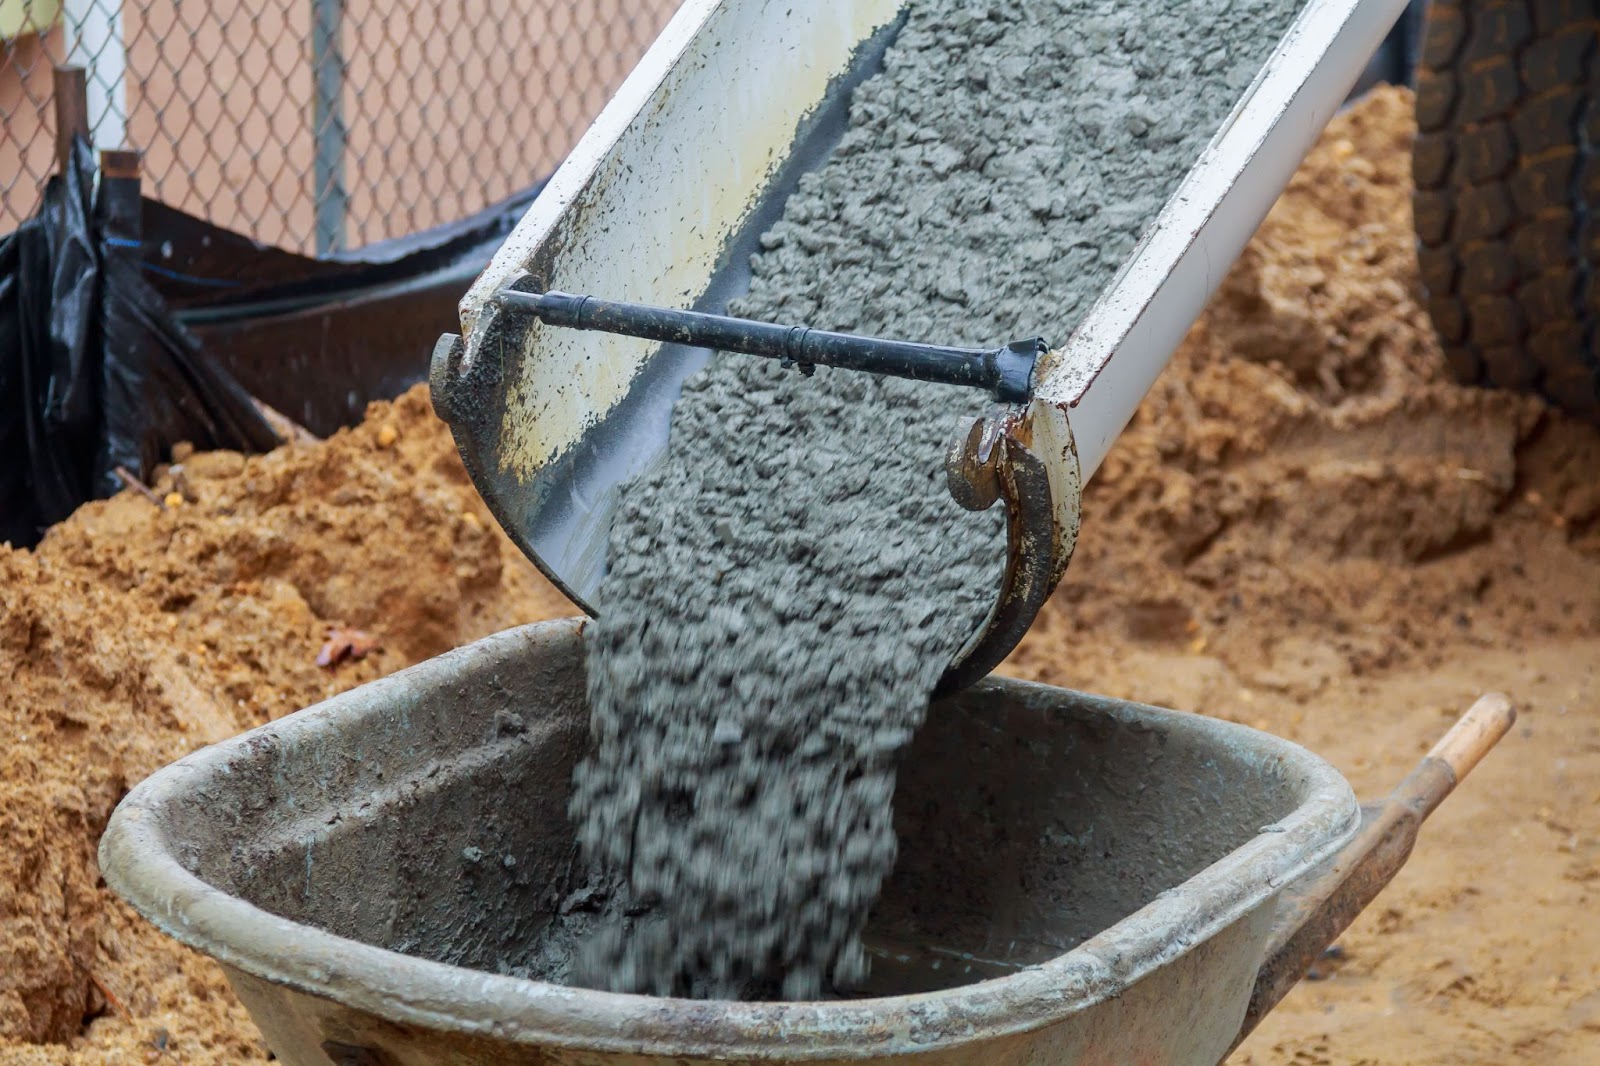 A wheelbarrow filled with cement from a mixer at a construction site, with brown soil visible in the background.